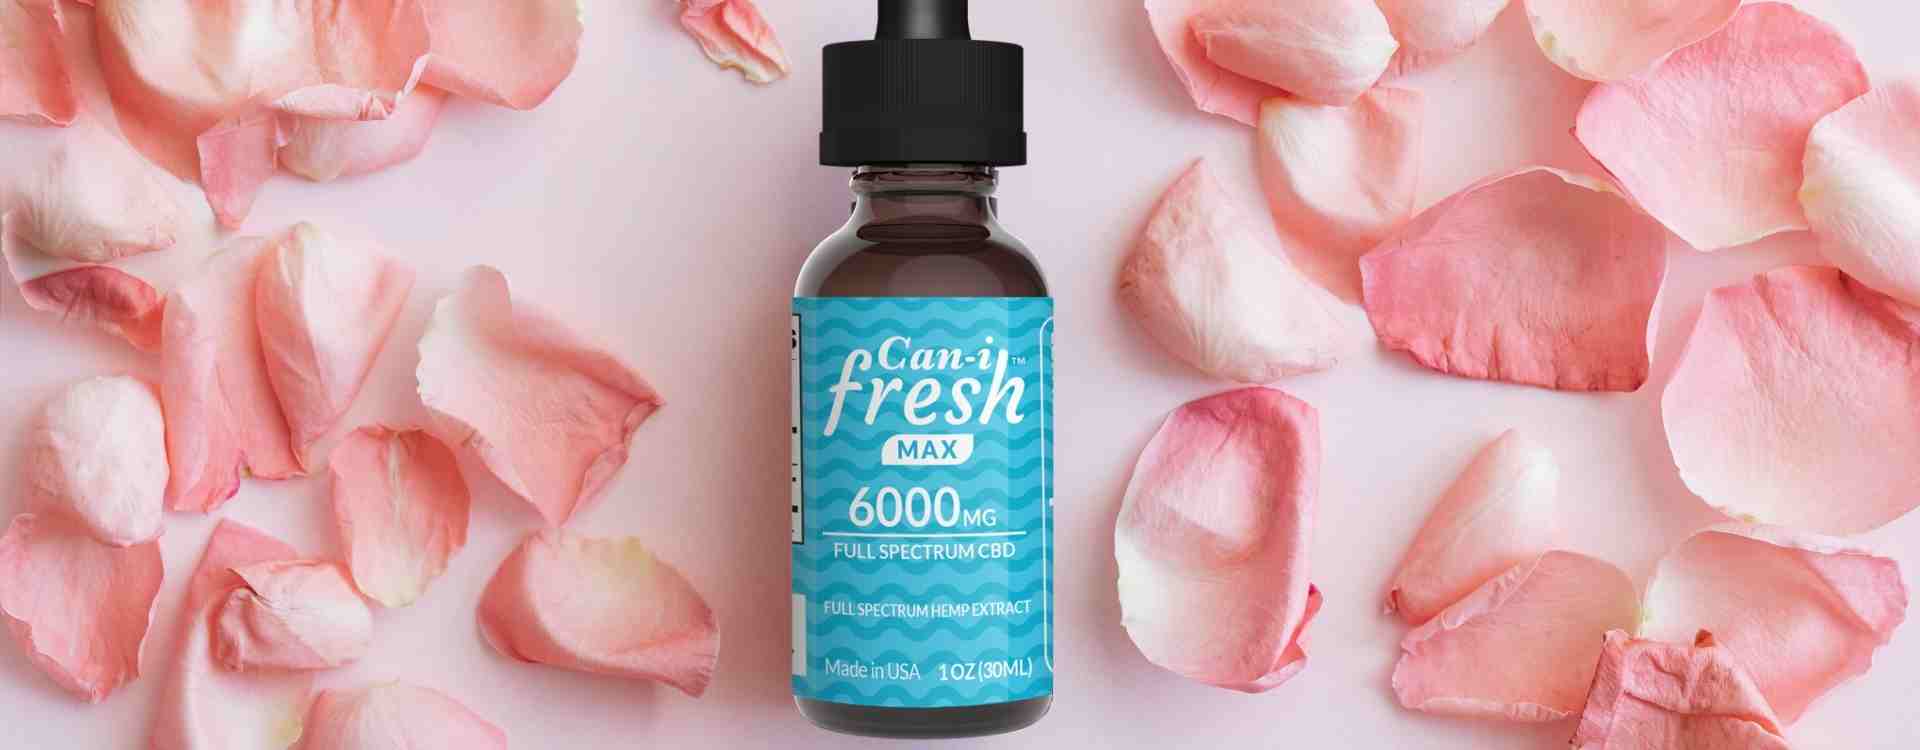 Alt=“CBD oil tincture for stress reduction and relaxation surrounding by pink petals”